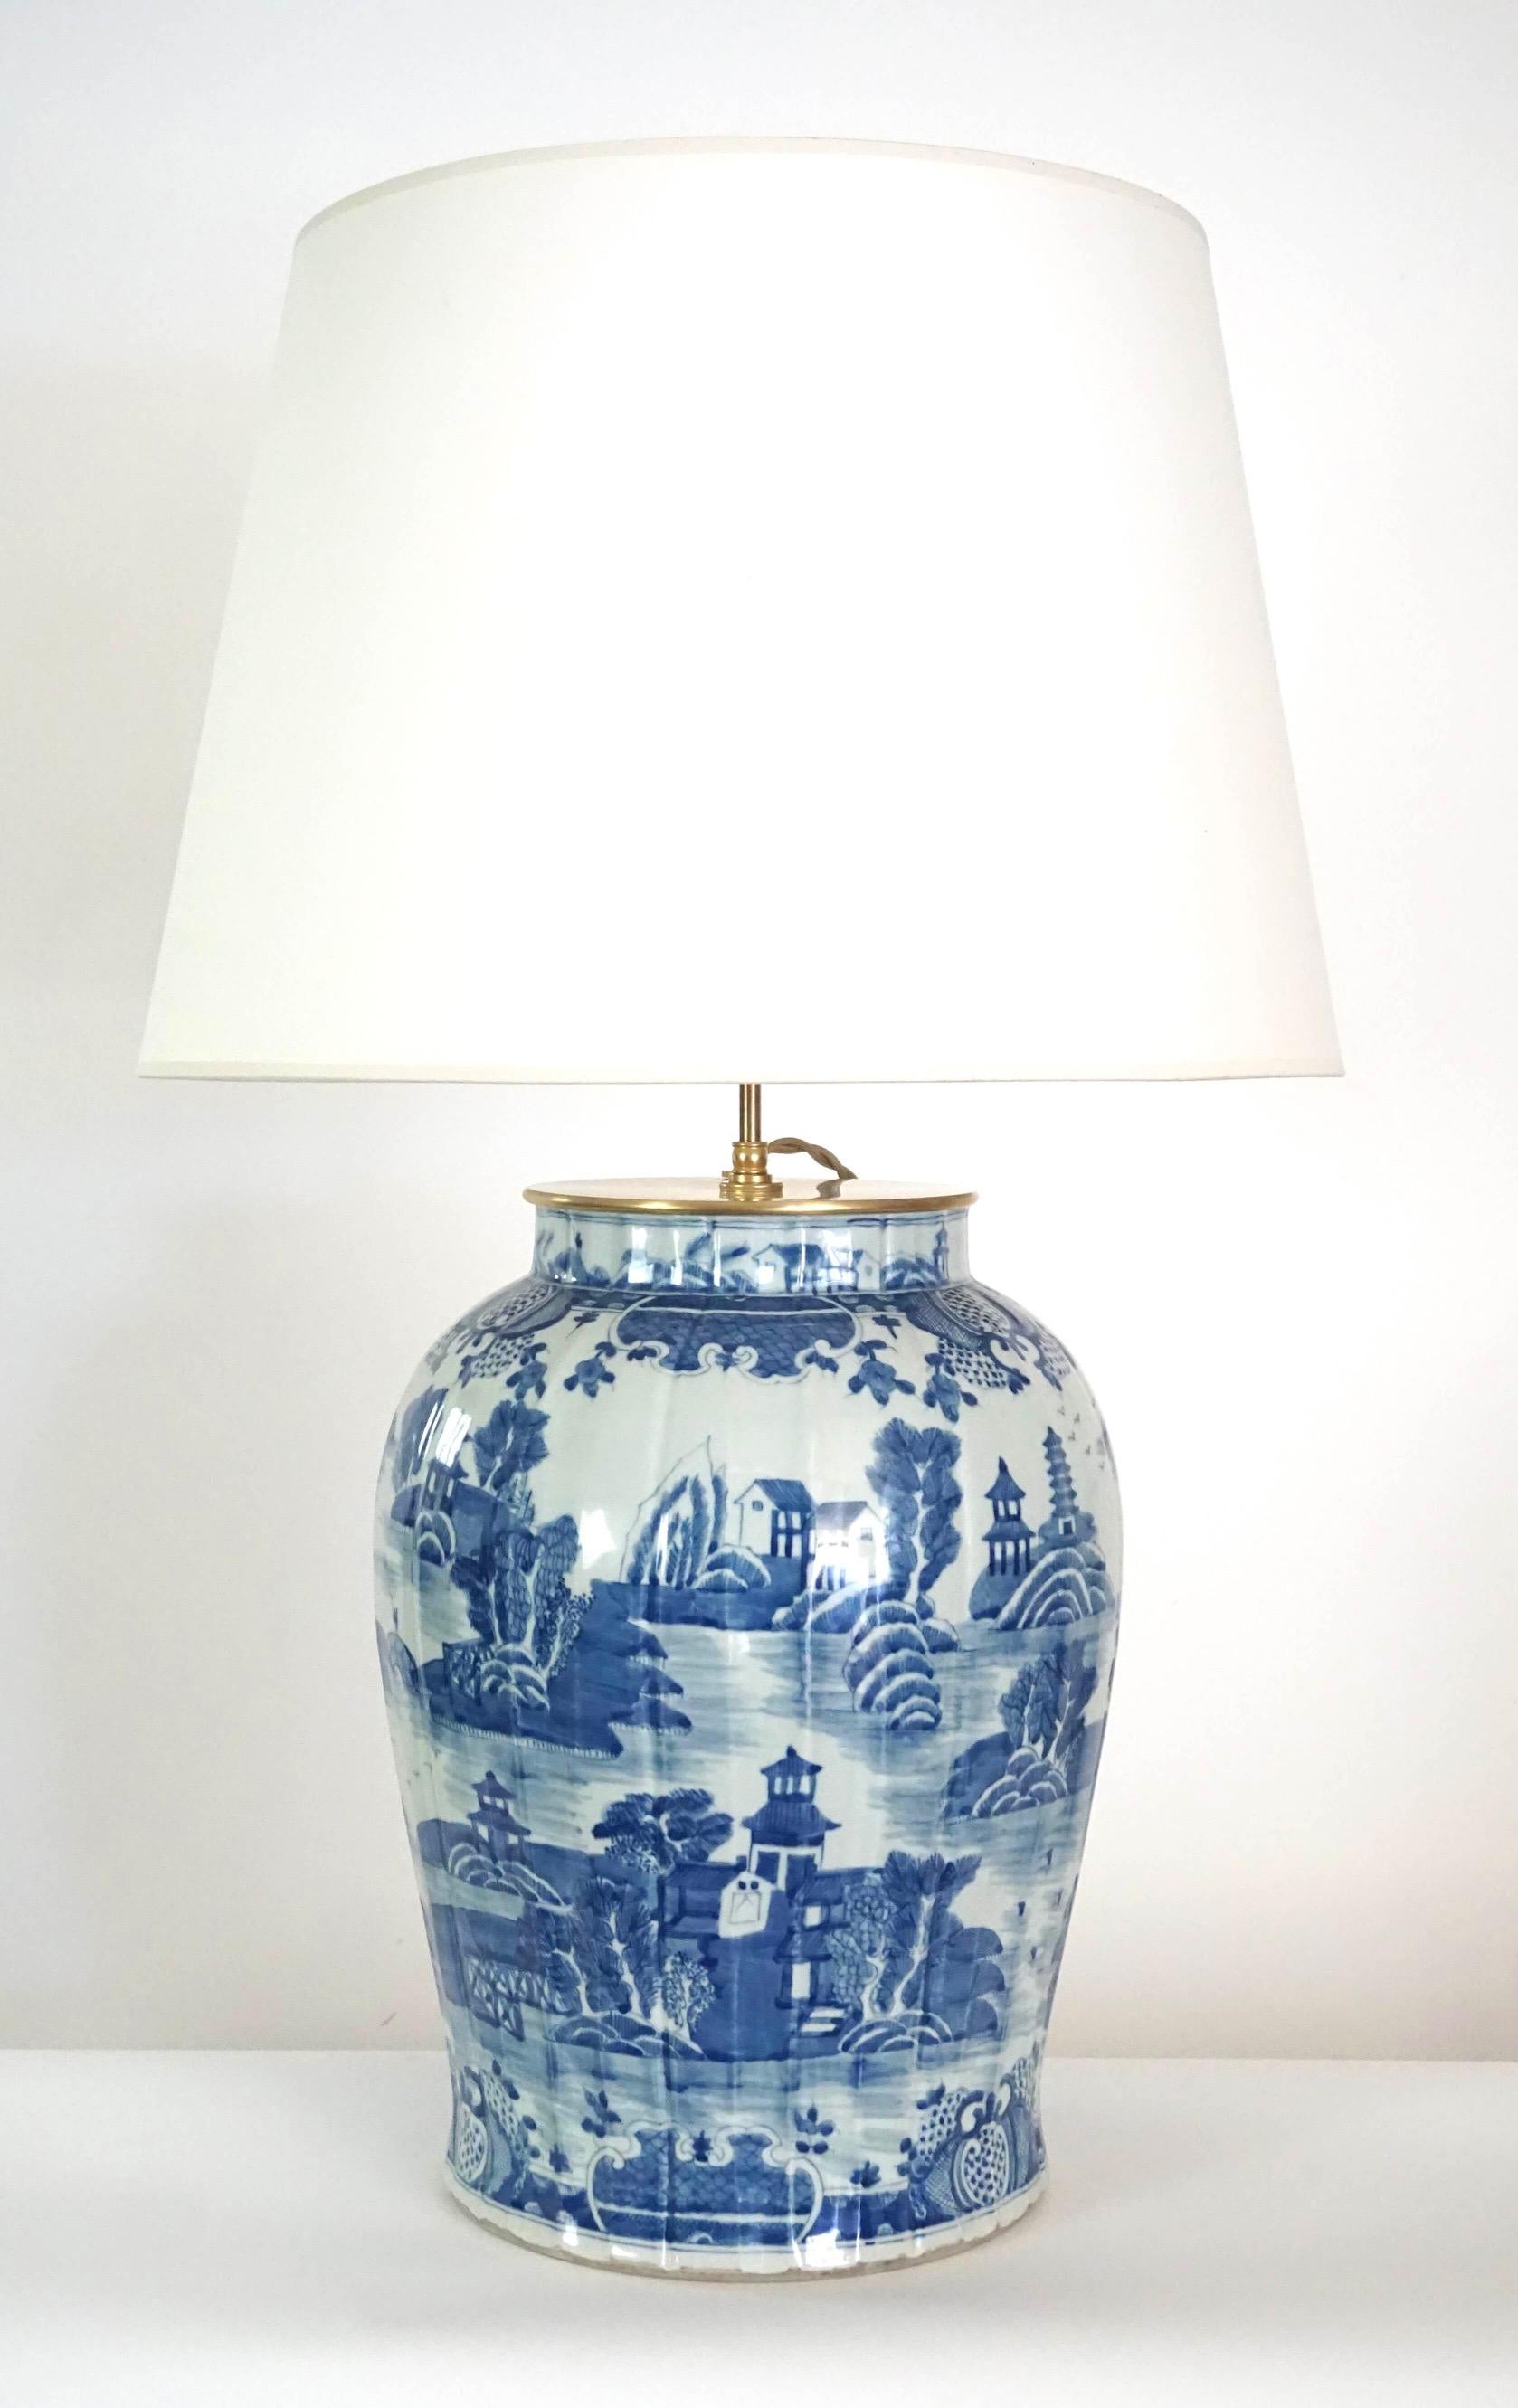 A beautiful Chinese late Qing dynasty (1636 - 1912) ribbed baluster form vase of large scale (17.75